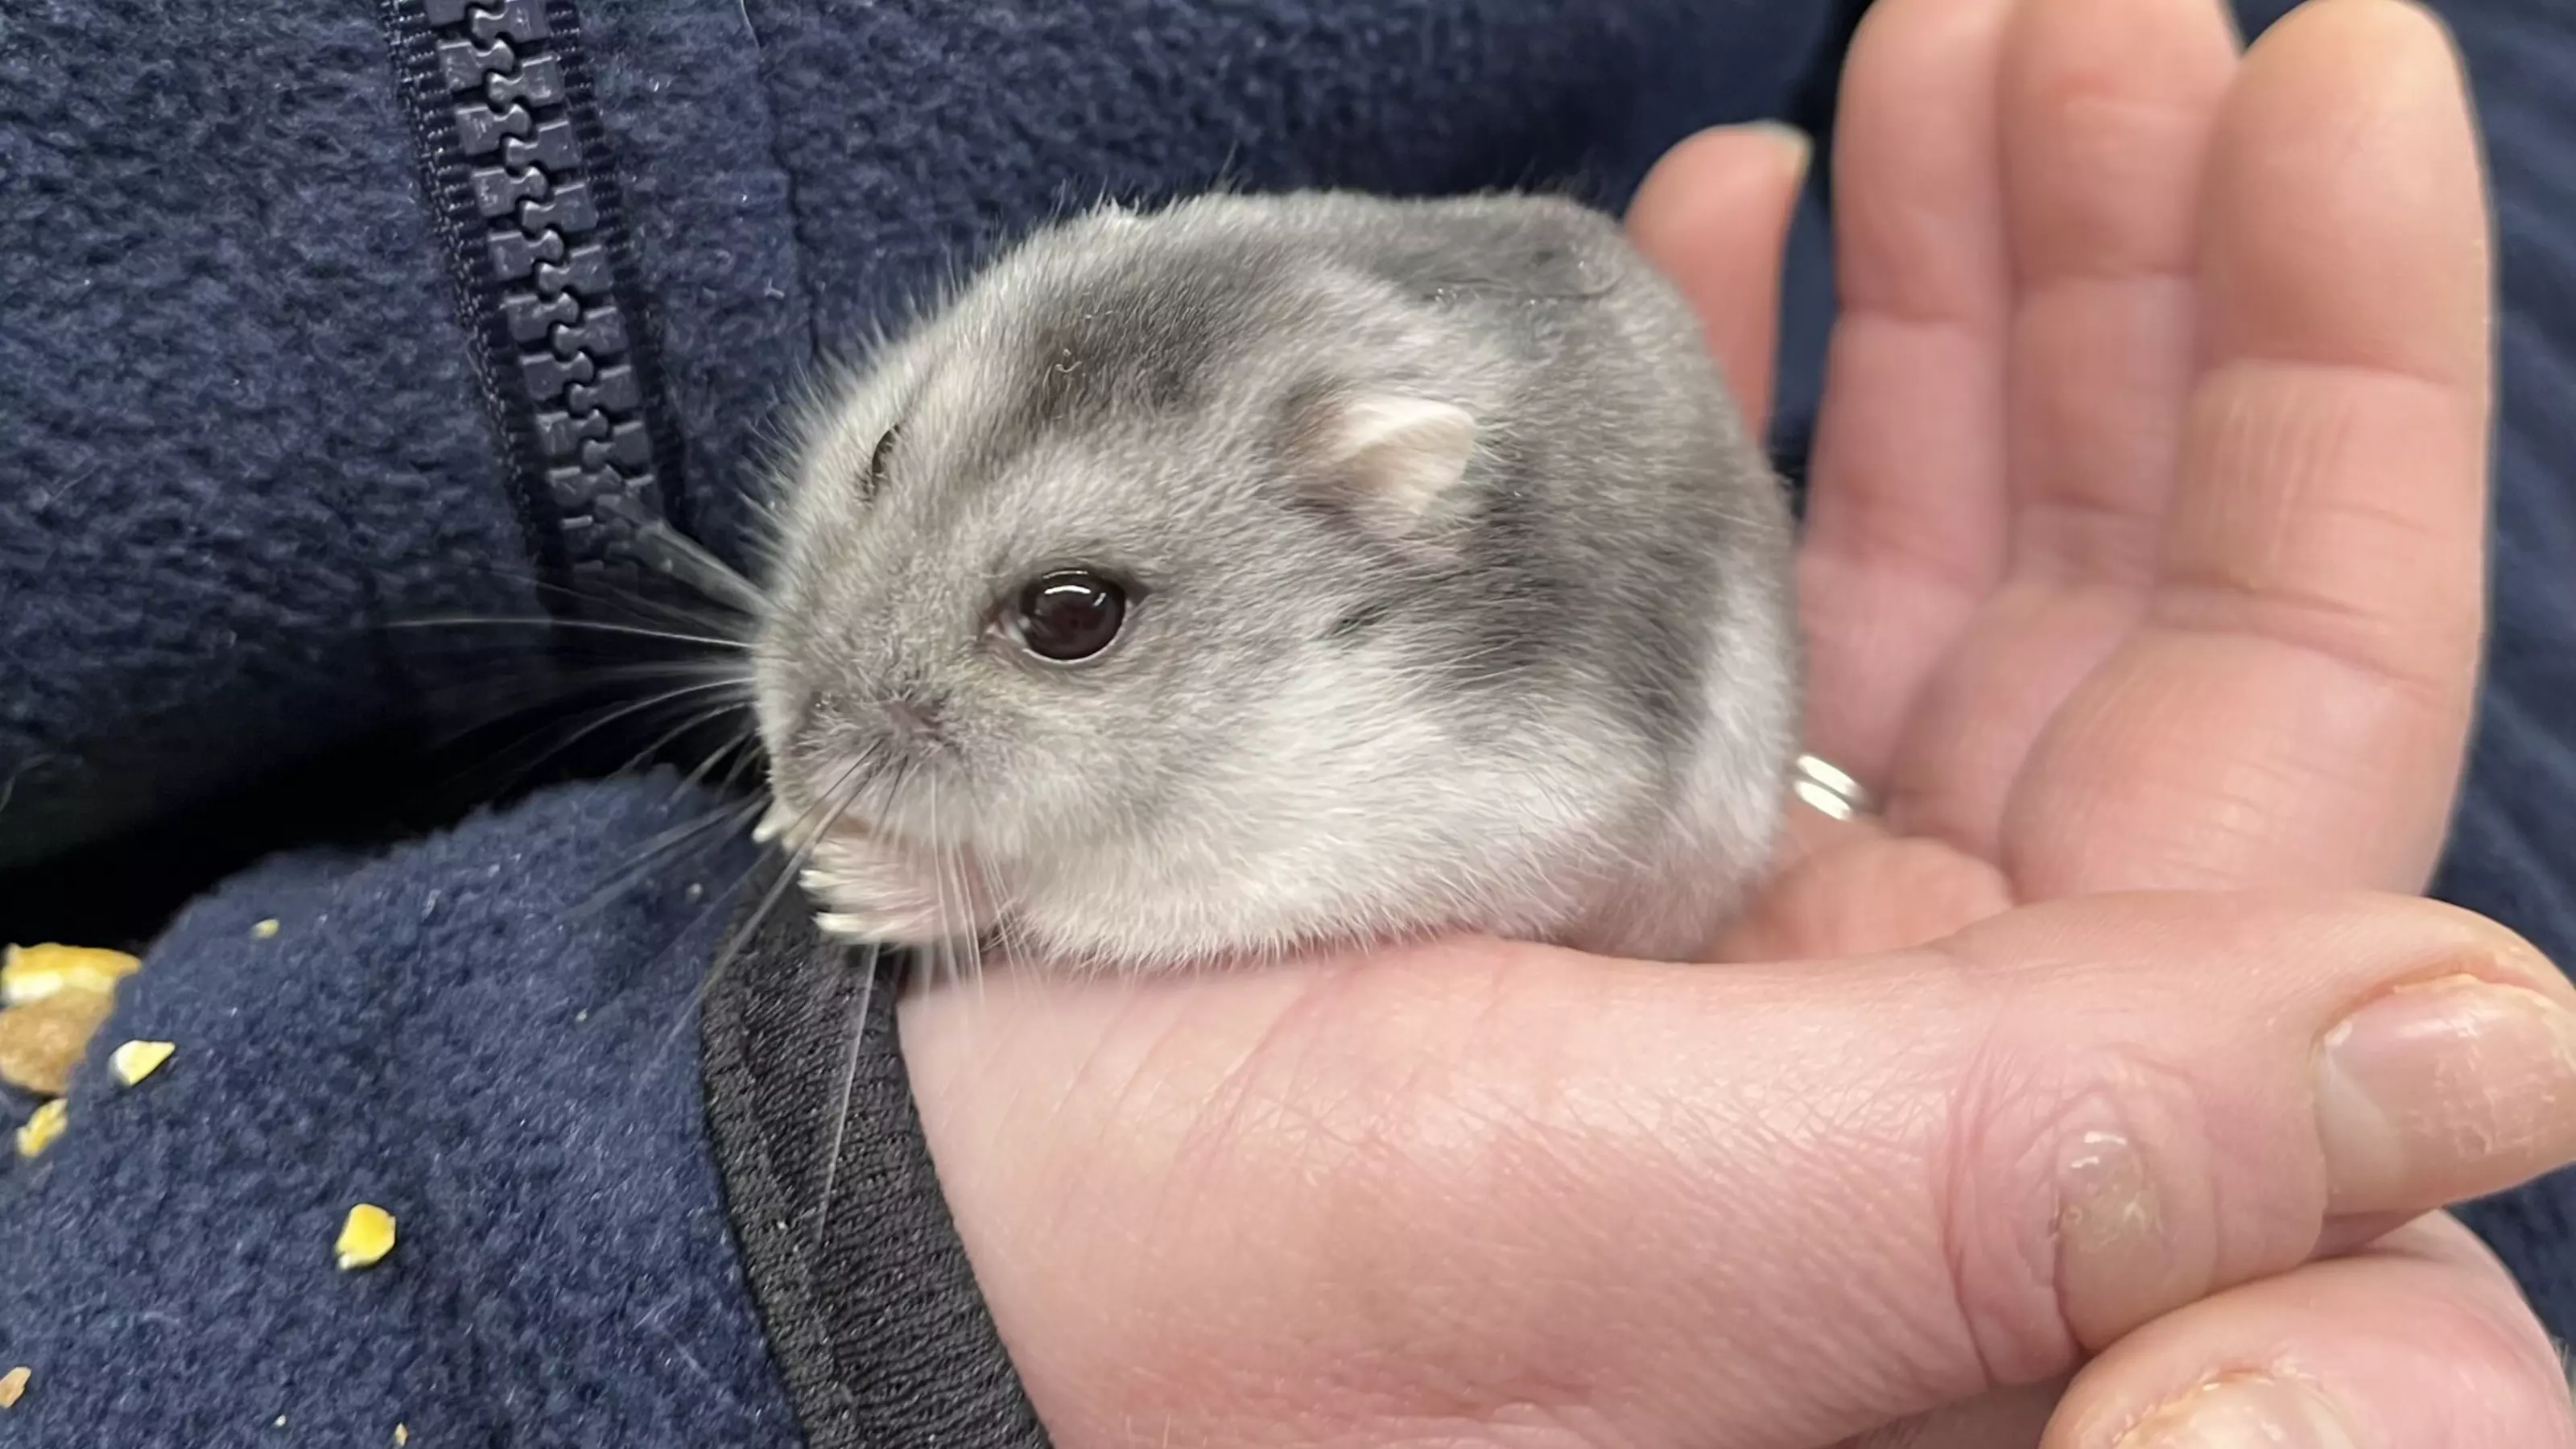 Grey hamster Roxy sits in a hand of person wearing navy jumper